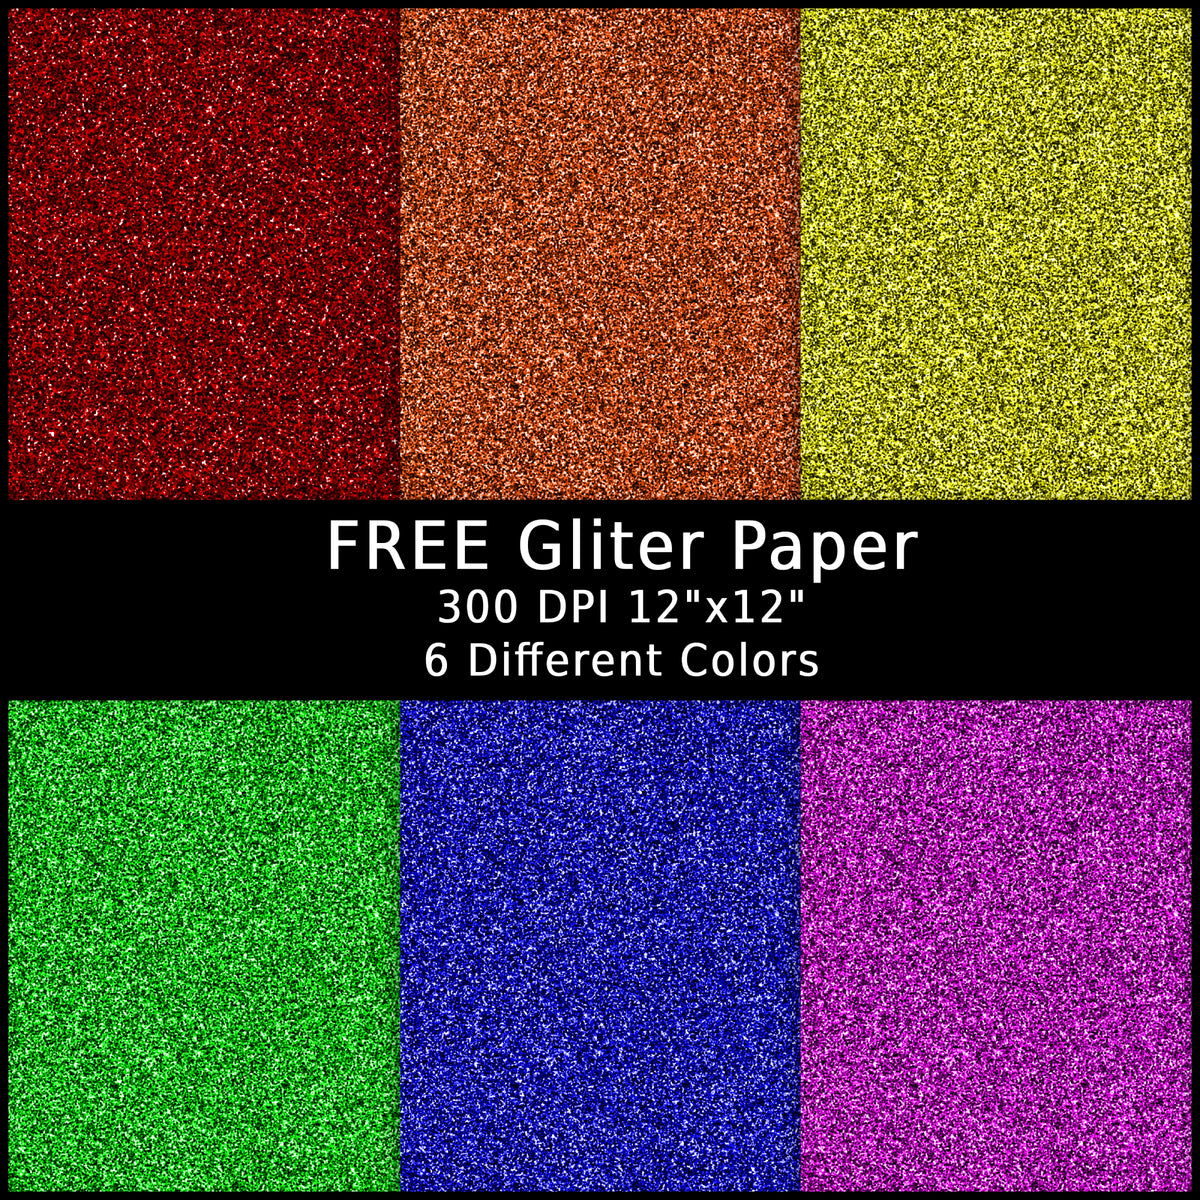 How to Make Digital Glitter for Free